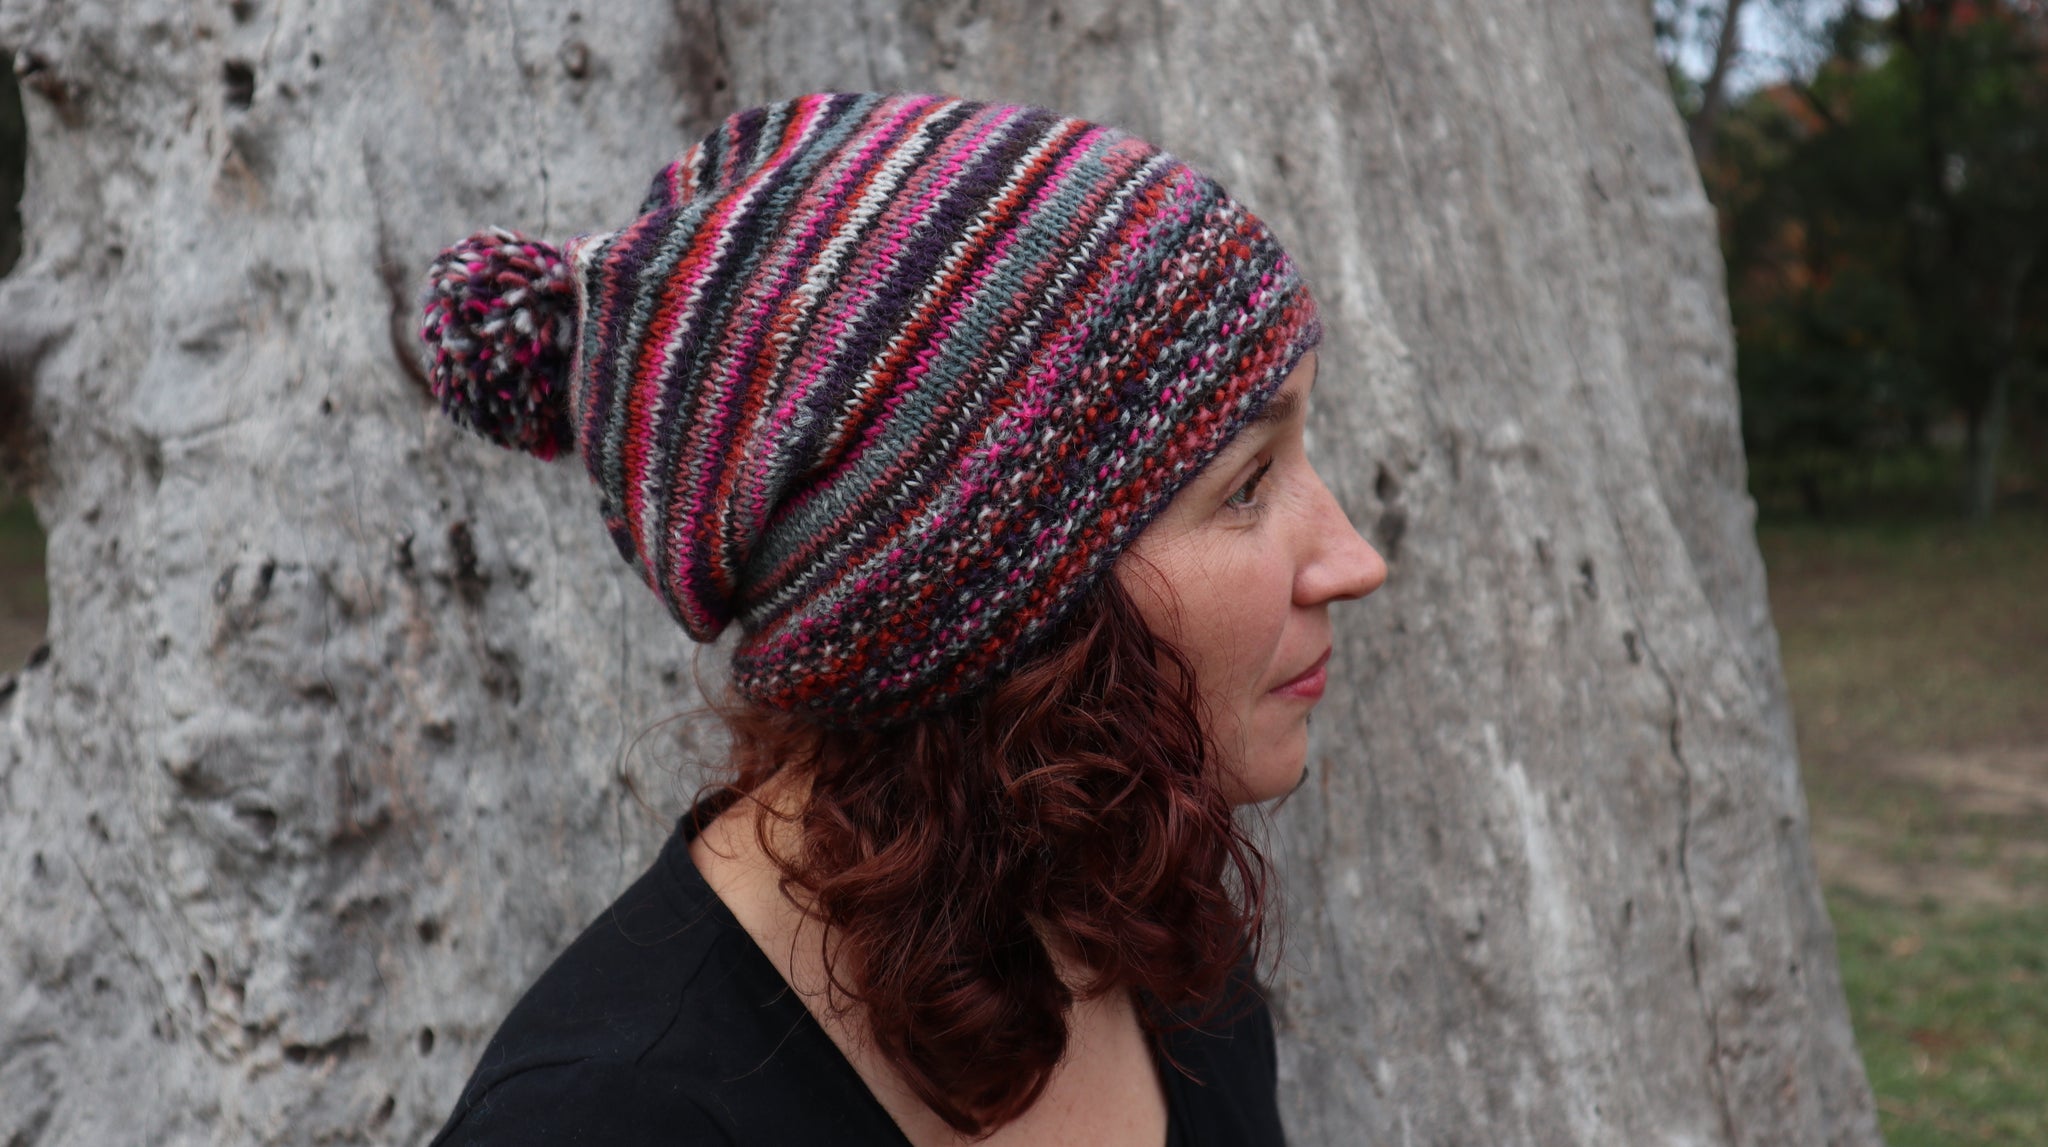 Fair Trade Ethical Woollen Beanie in Striped Multi Coloured Design with Pom Pom